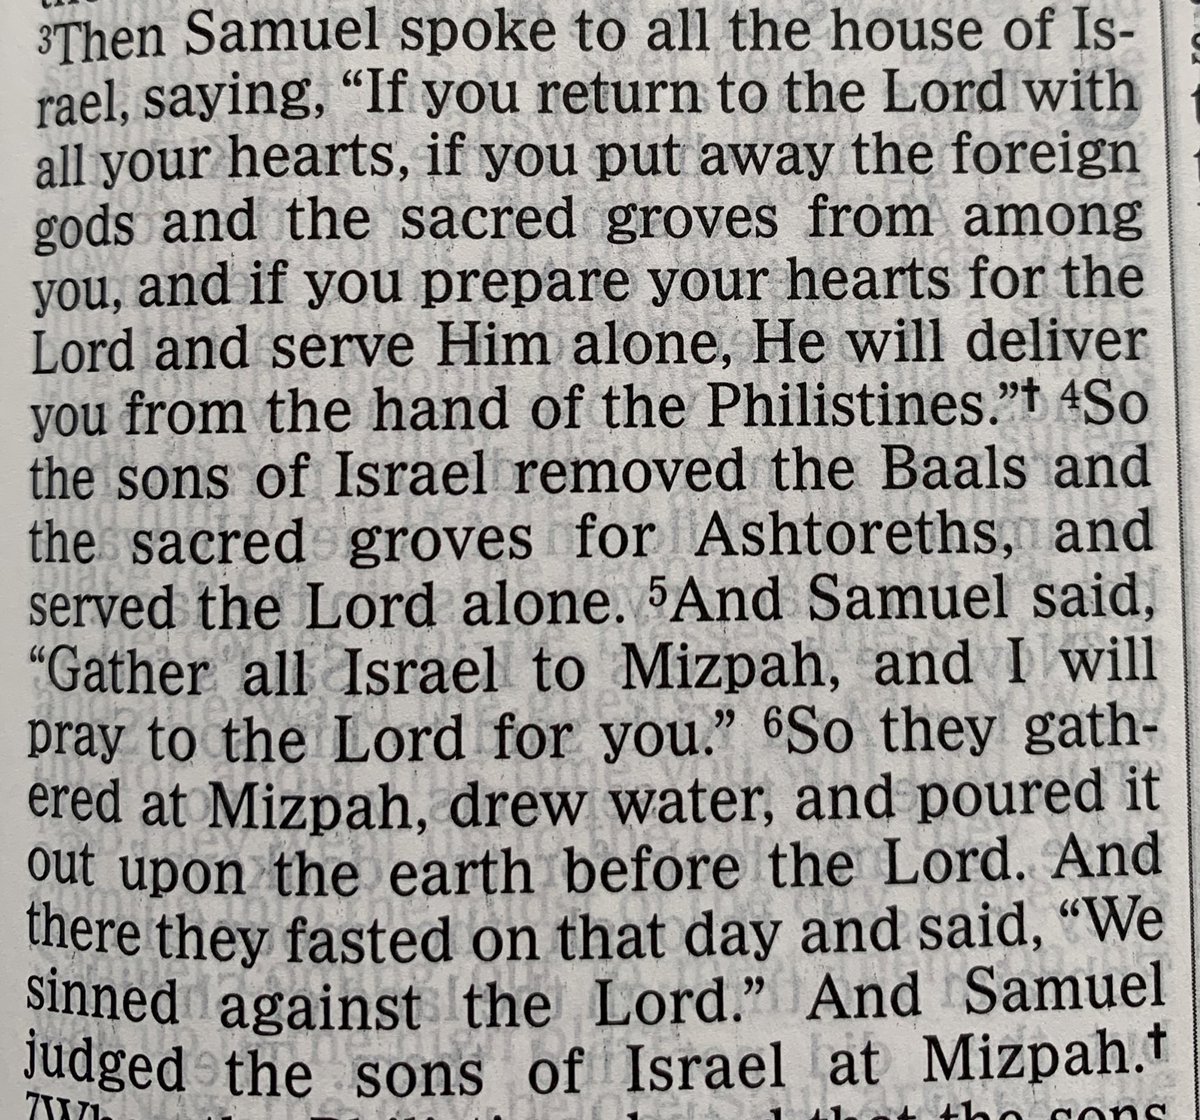 When the ark of the covenant came back to Israel from the philistines, the prophet Samuel called the people to return to God “with all your hearts”